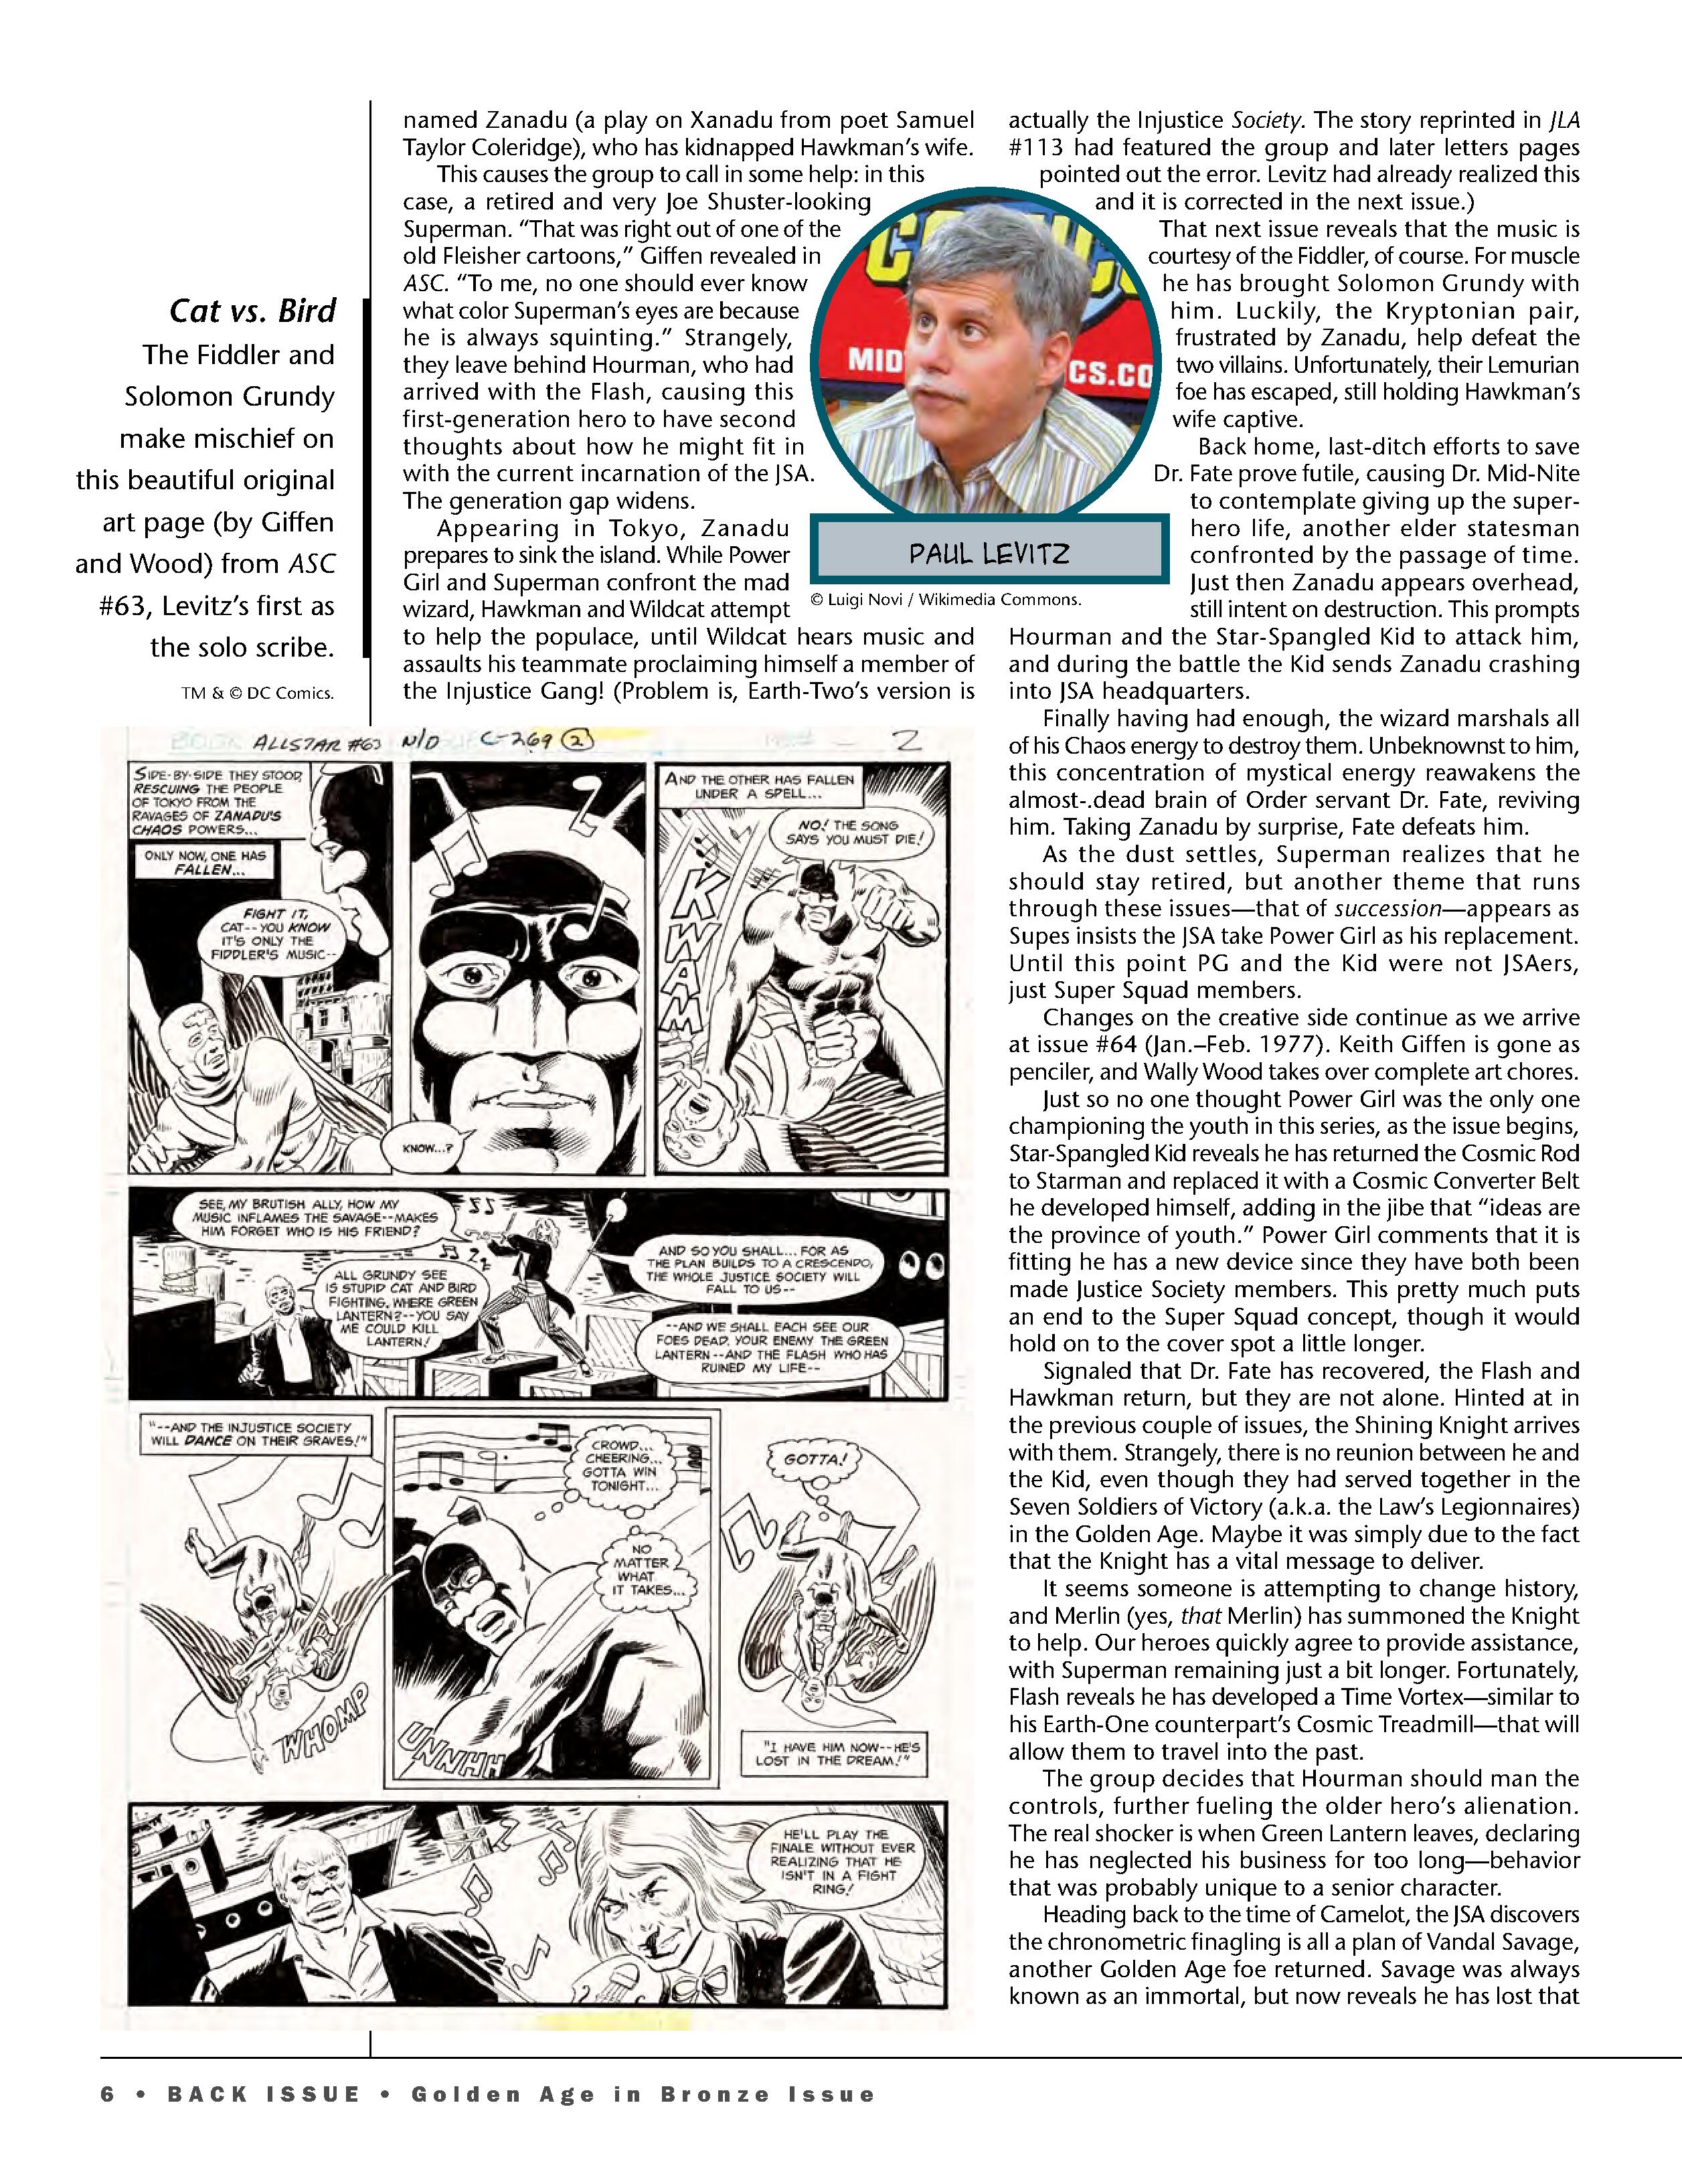 Read online Back Issue comic -  Issue #106 - 8